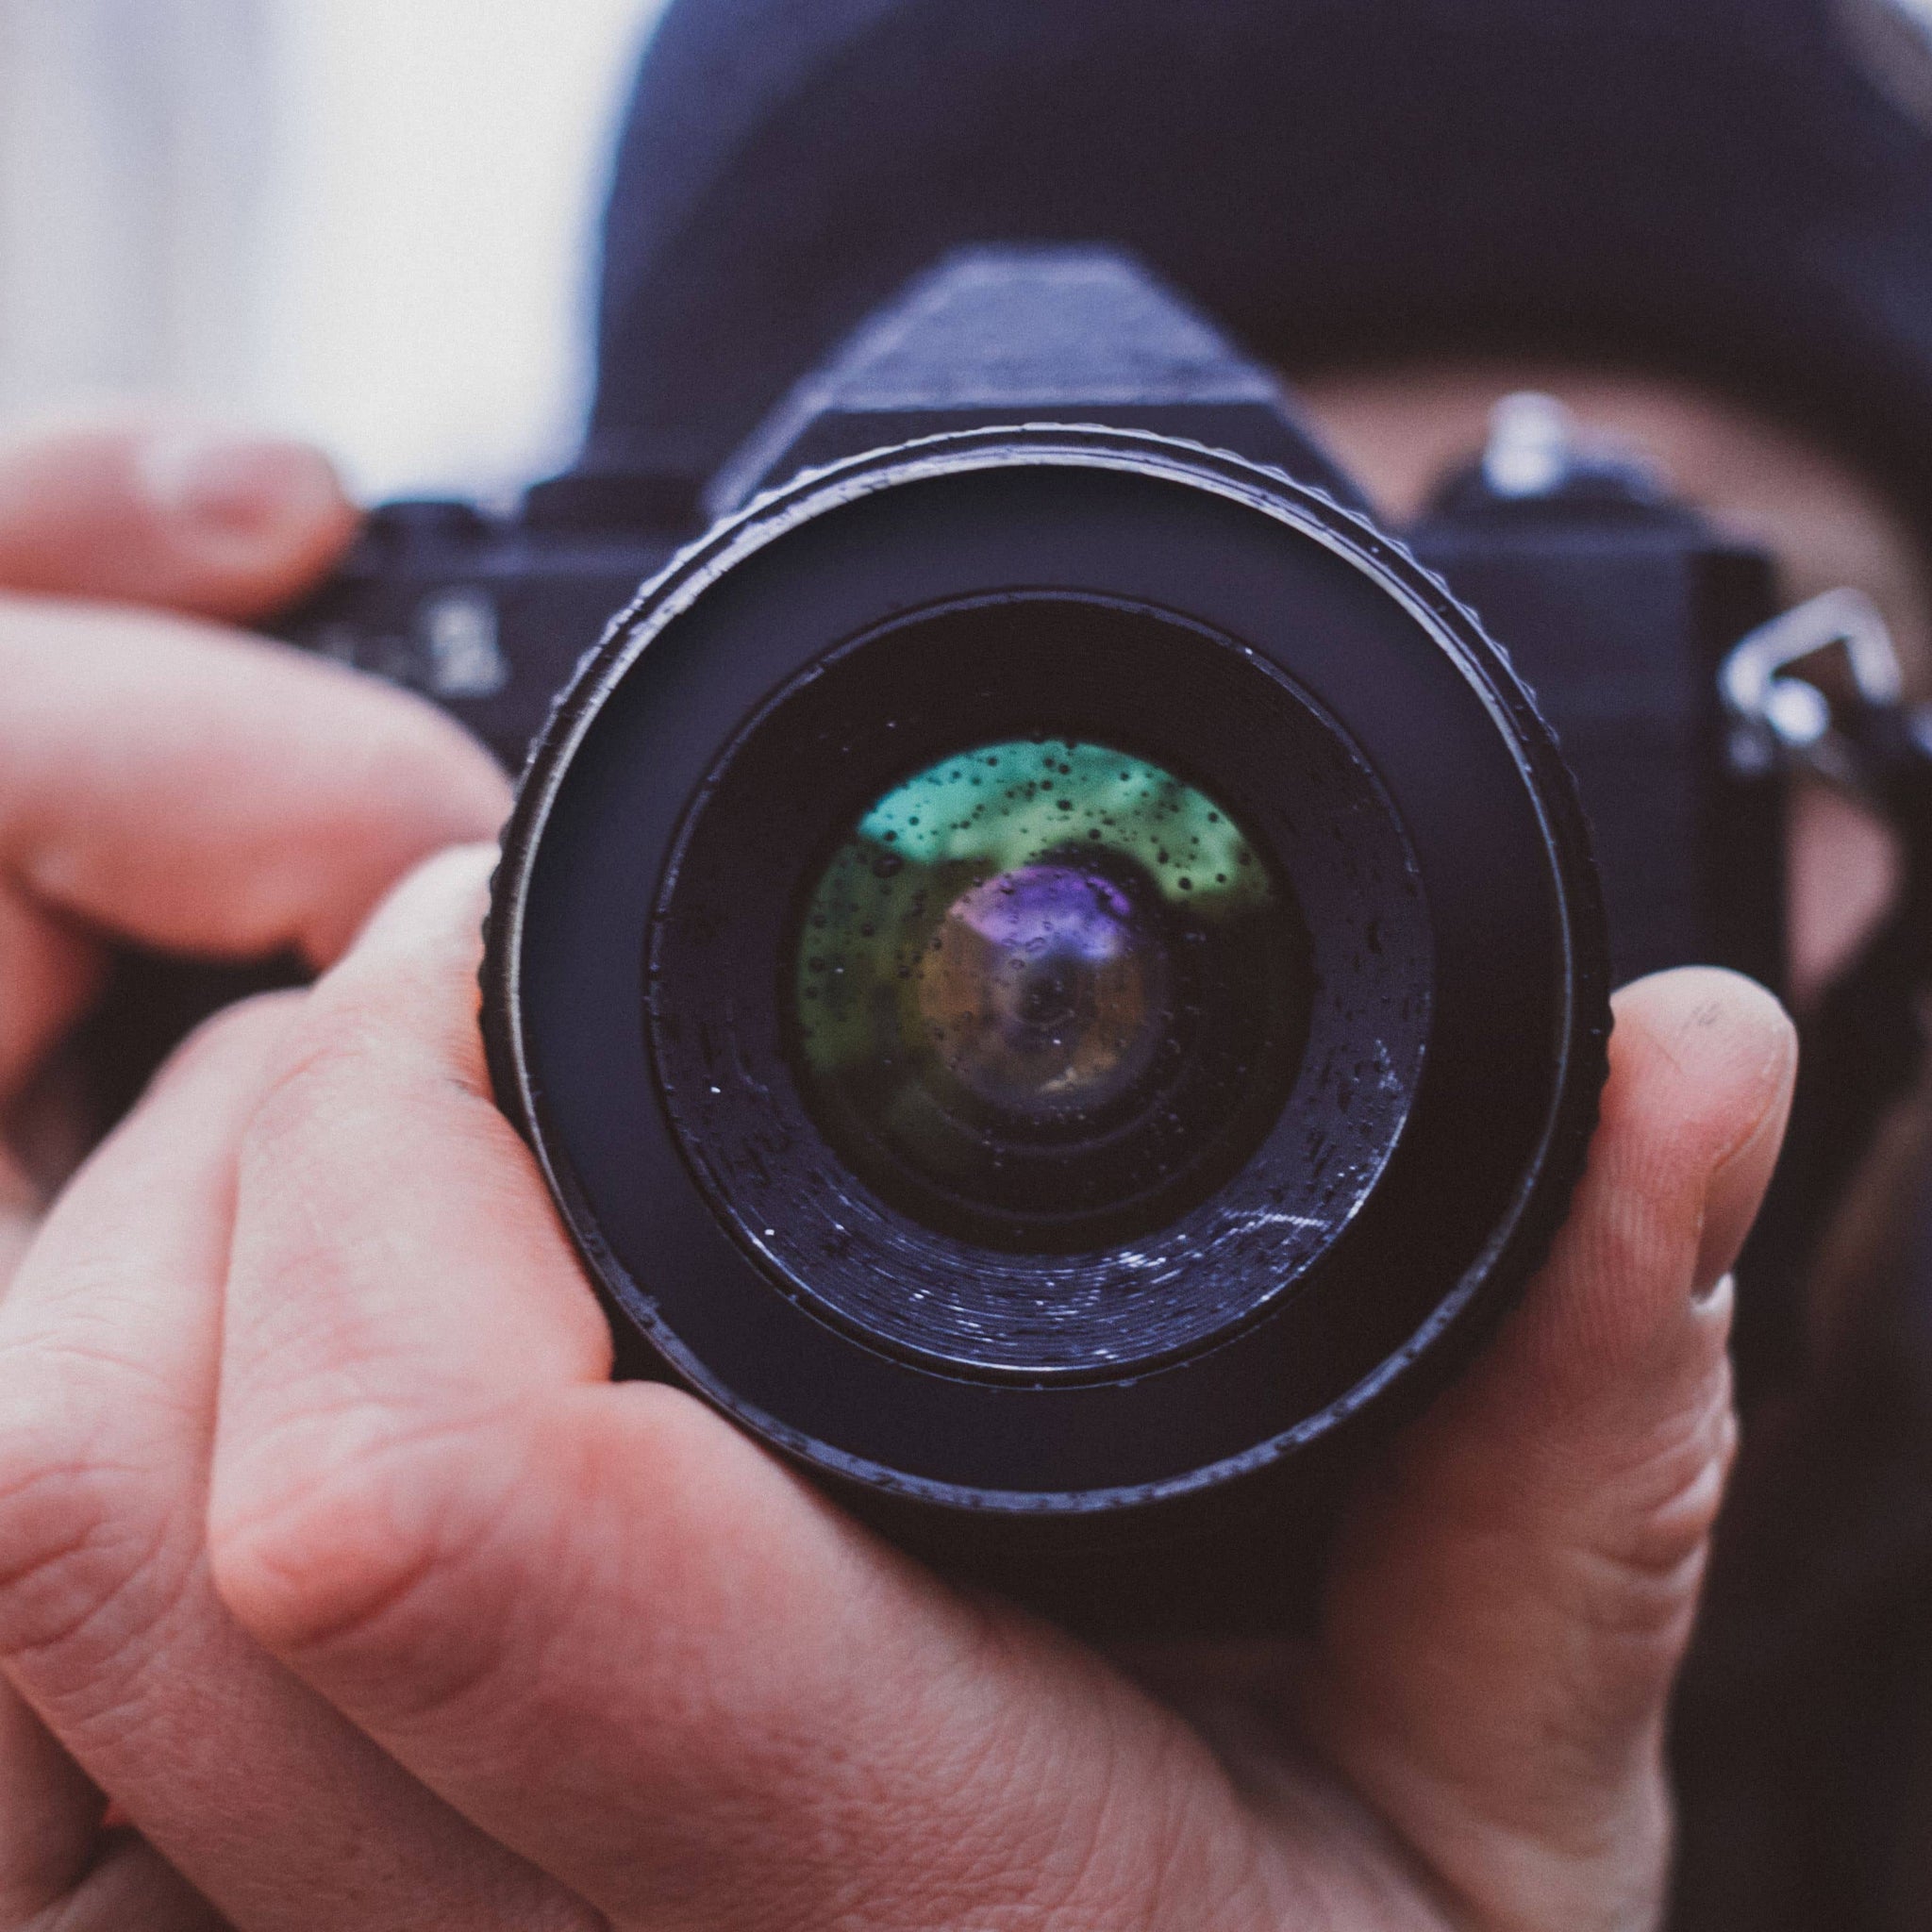 Steps to Becoming a Professional Photographer - How to get into Photography - Becoming a Photographer